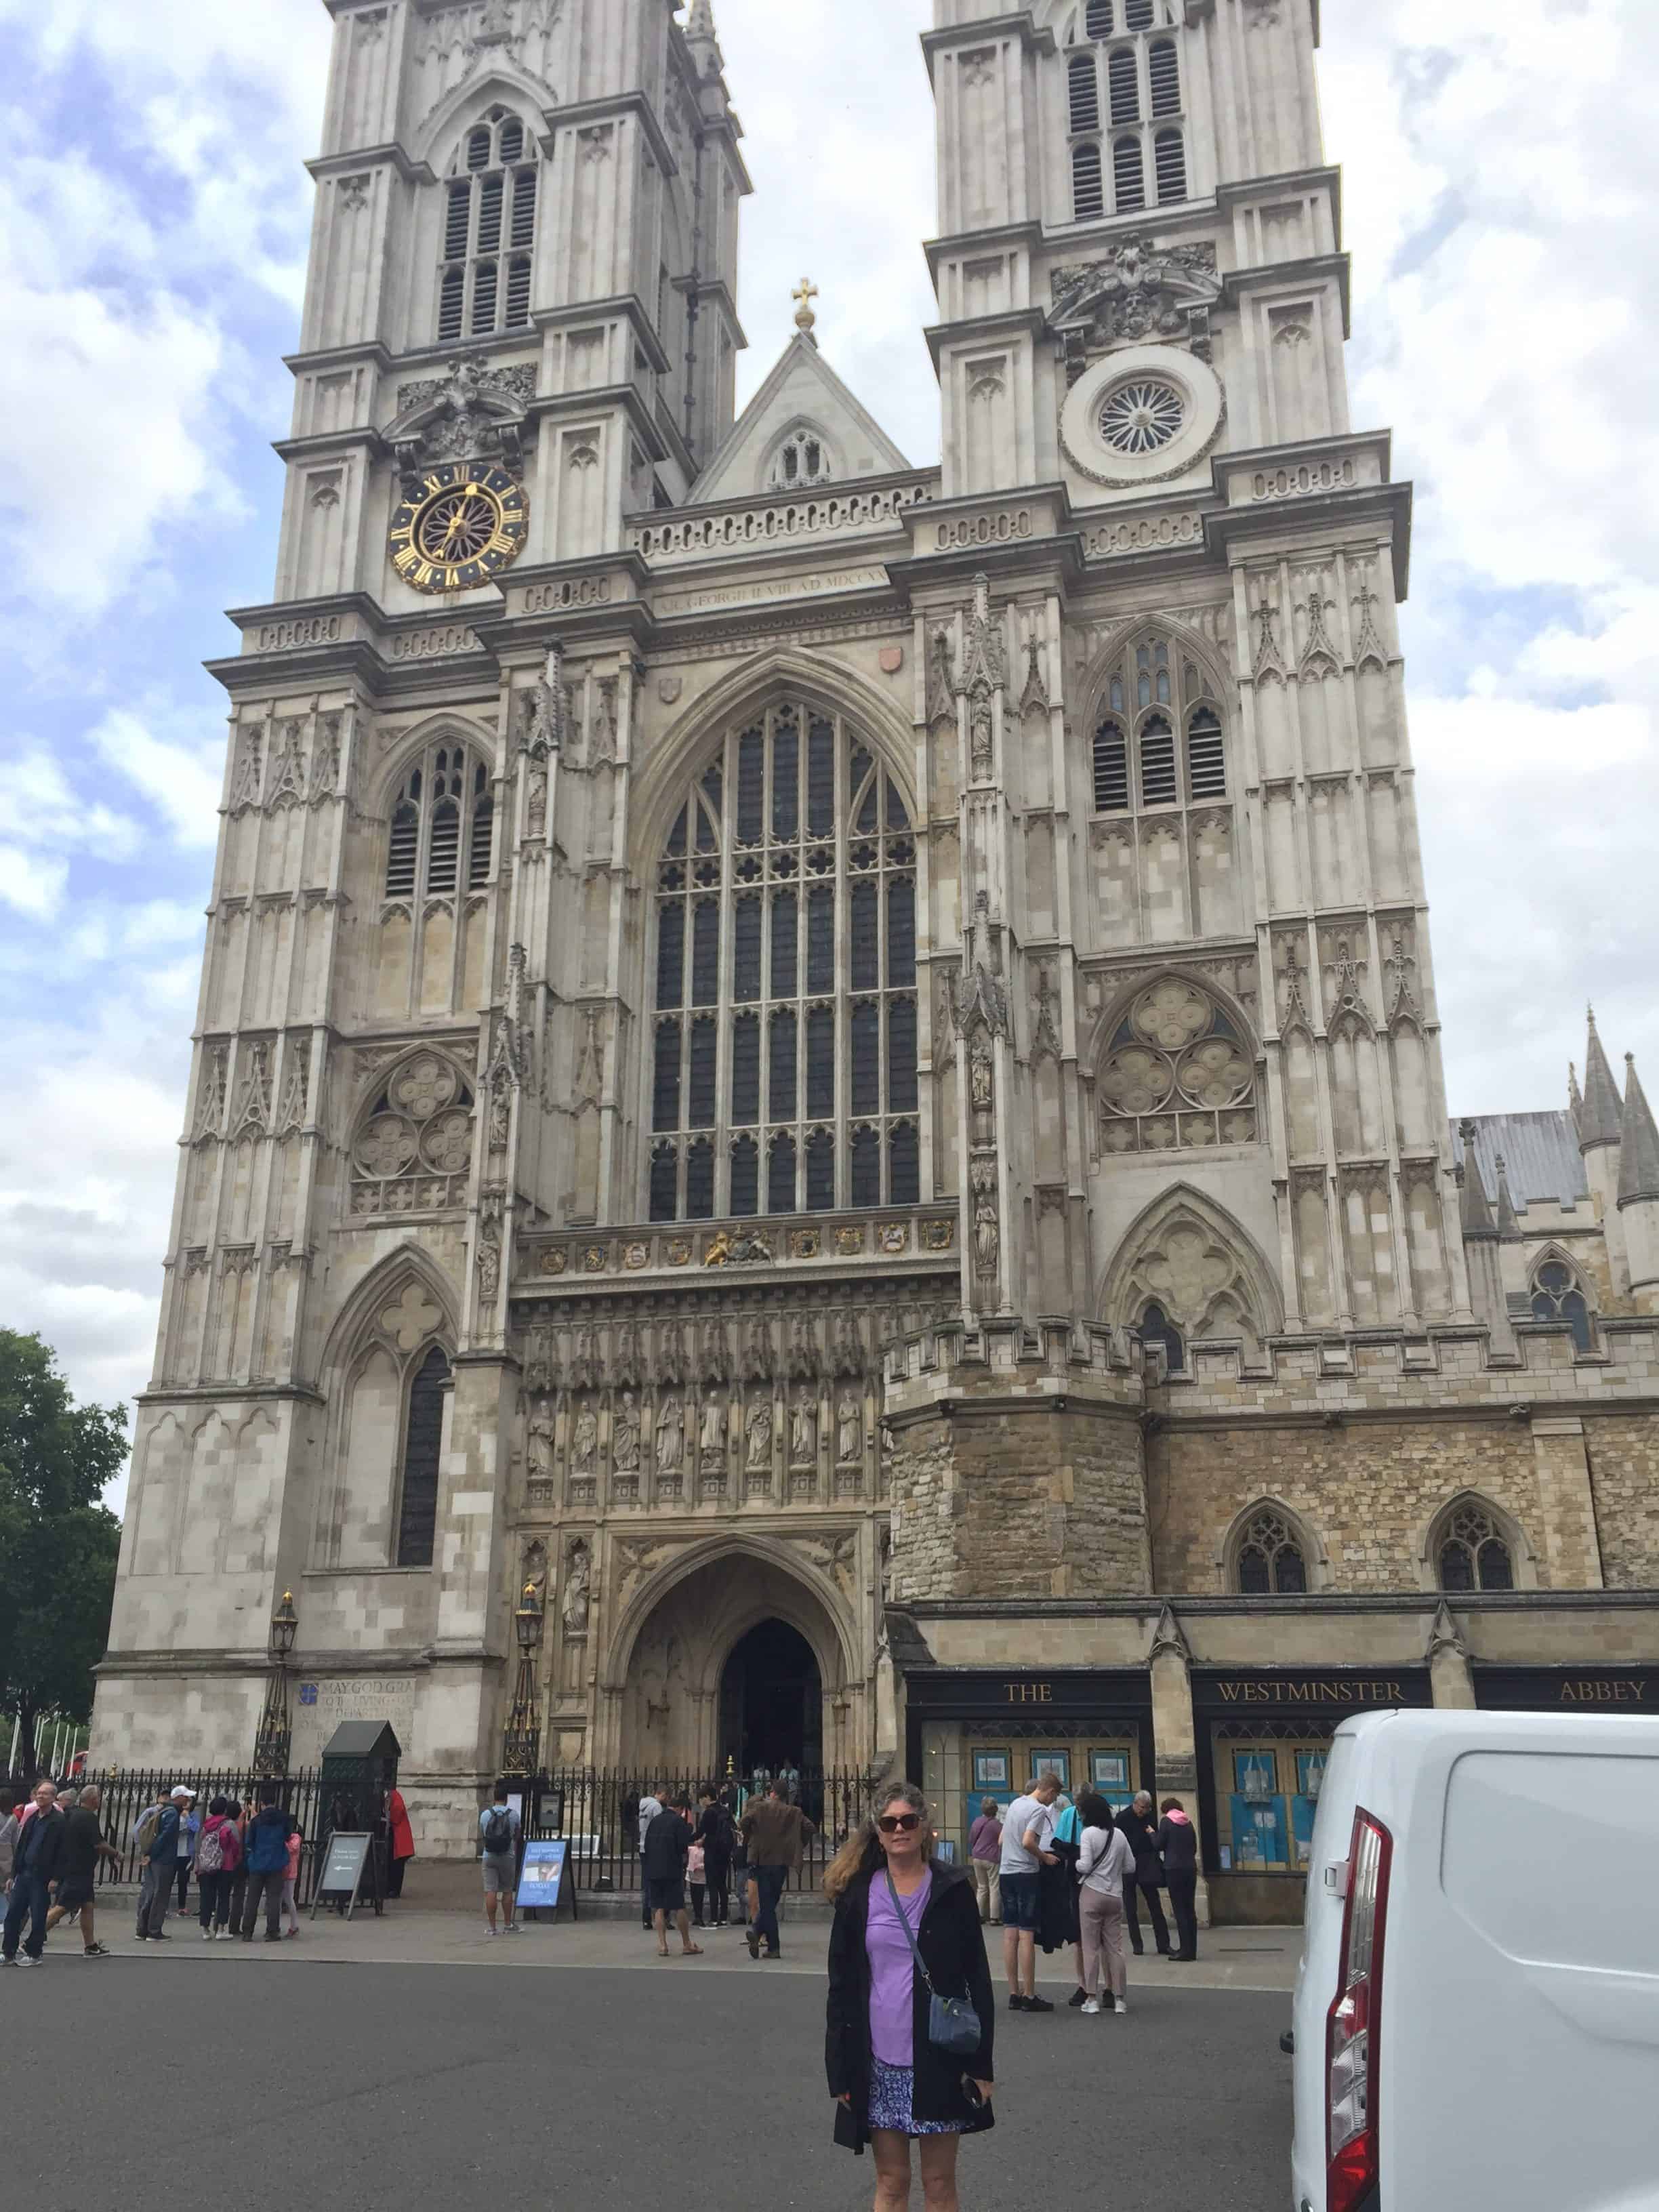 Standing in front of the famous church, the Places Where We Go visit Westminster Abbey